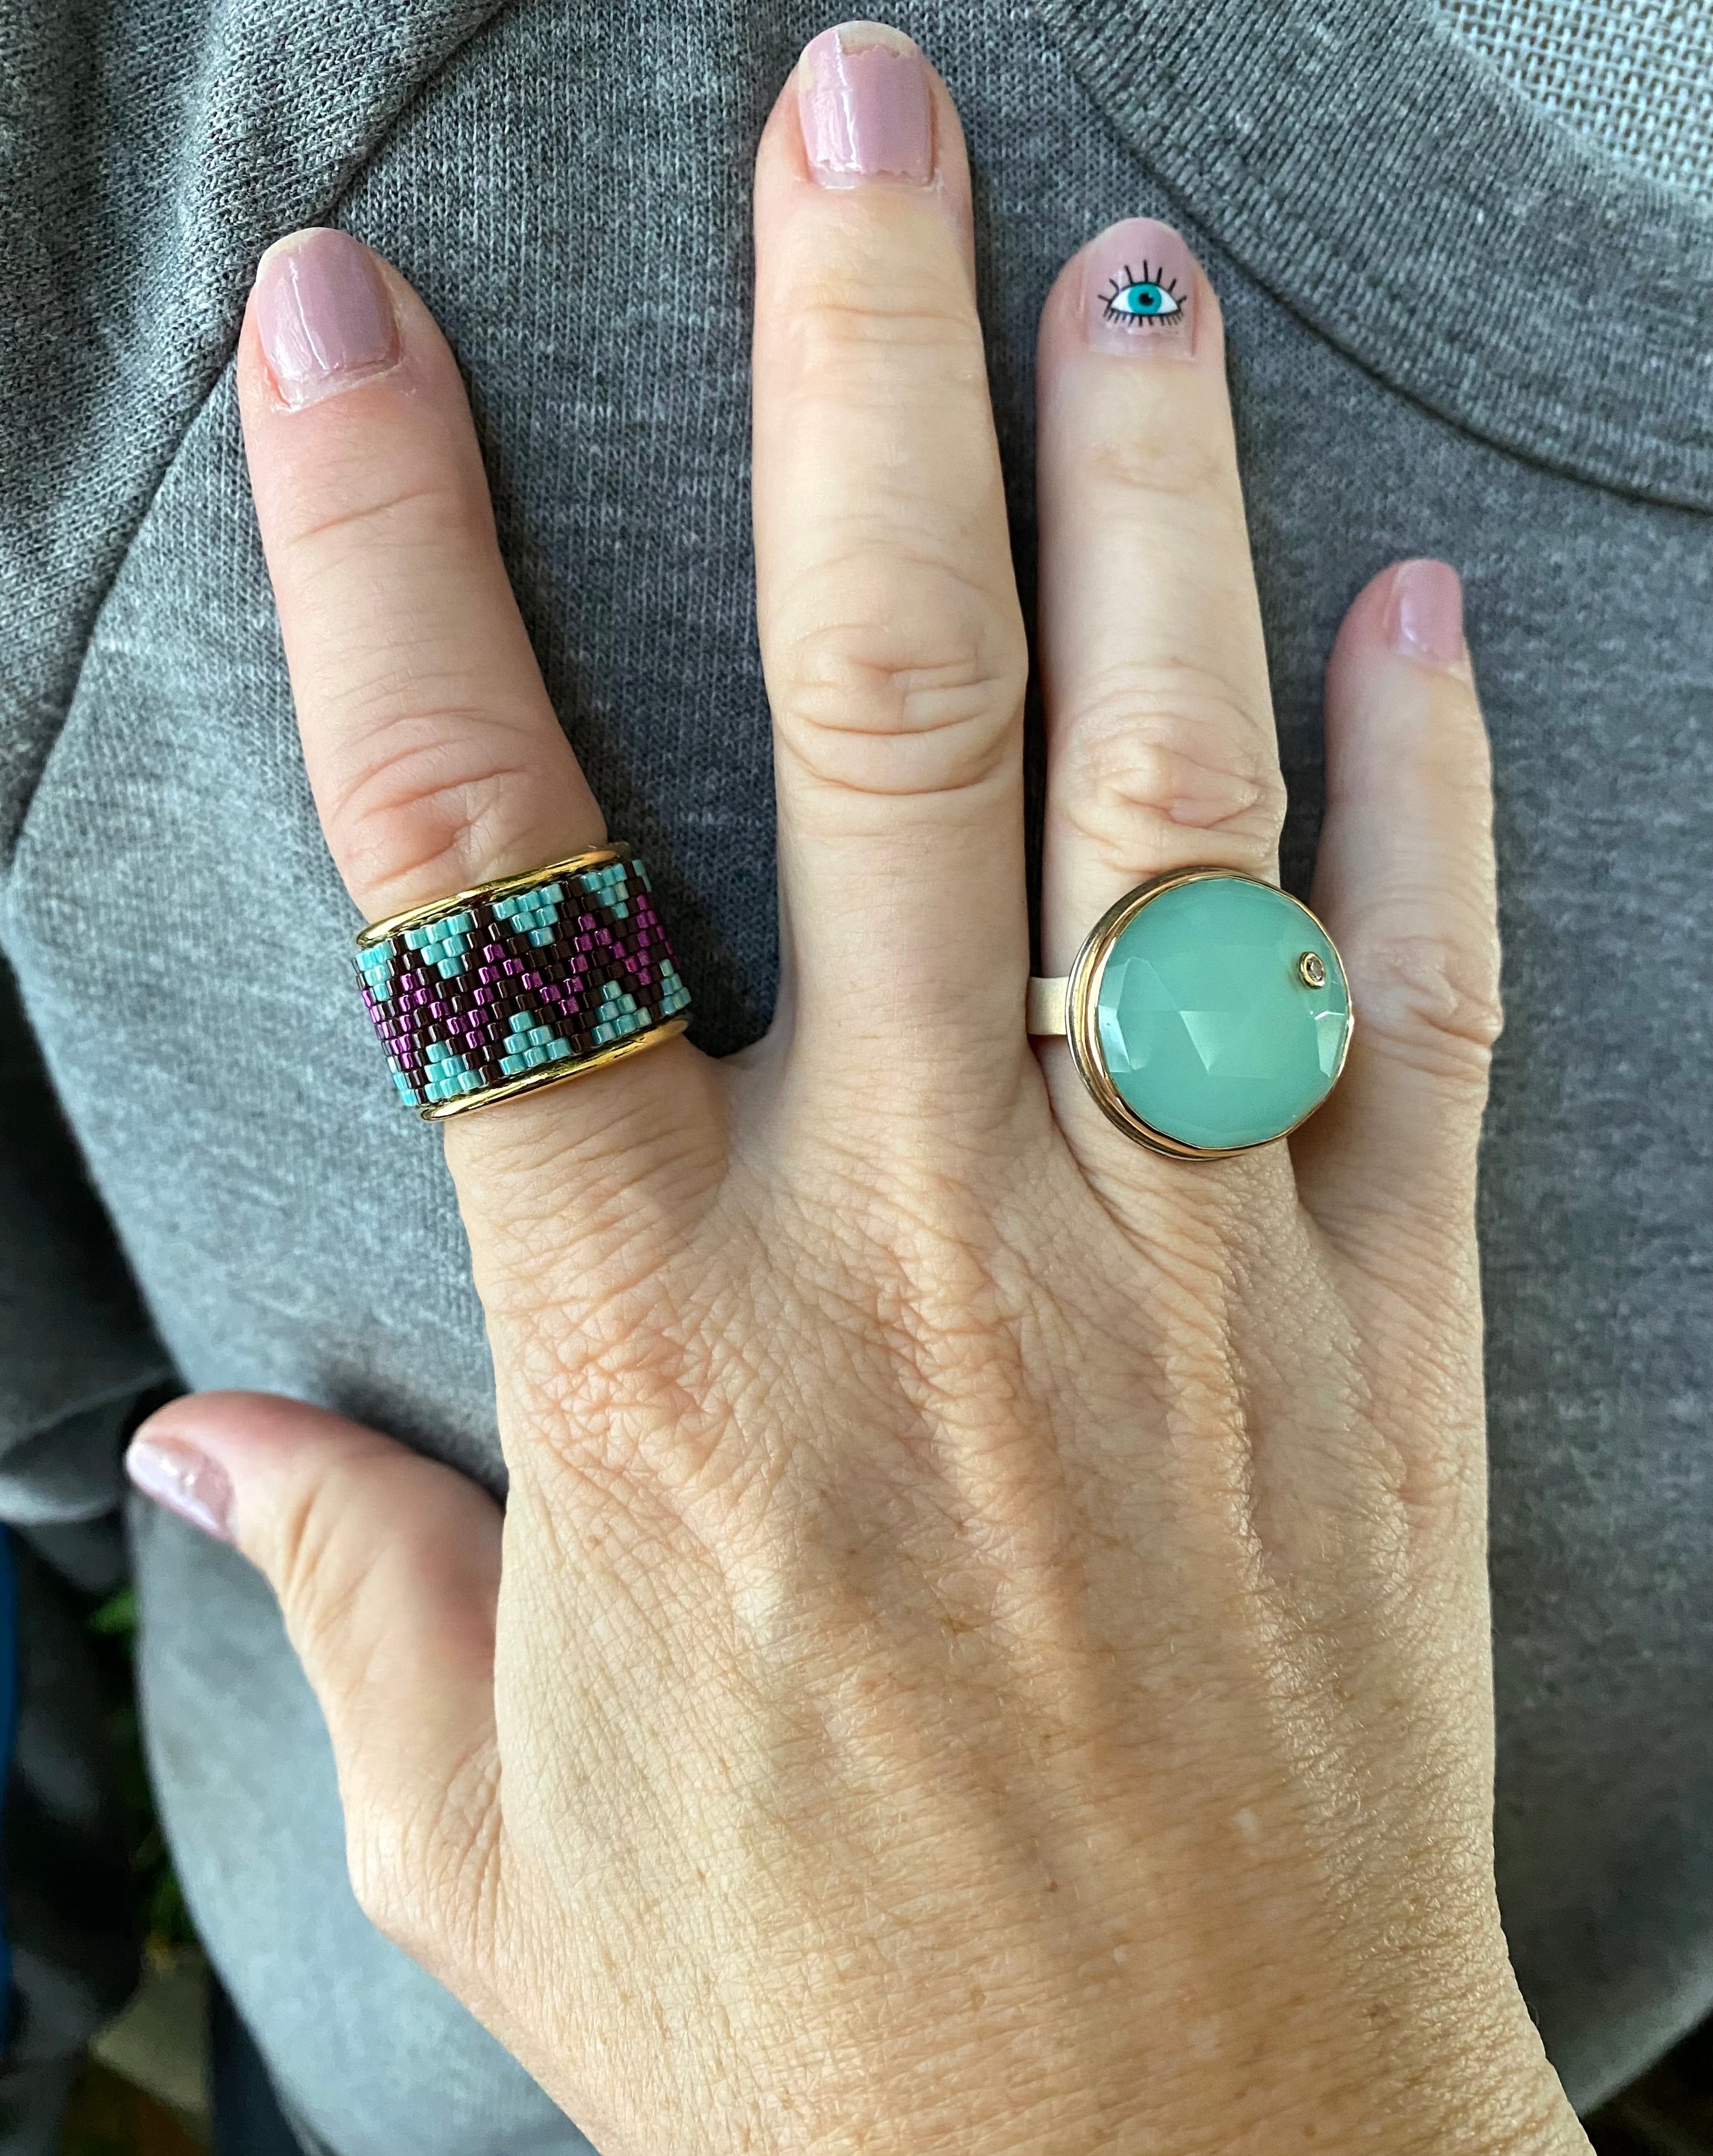 Beaded wide band ring - Turquoise /Raspberry Chevron